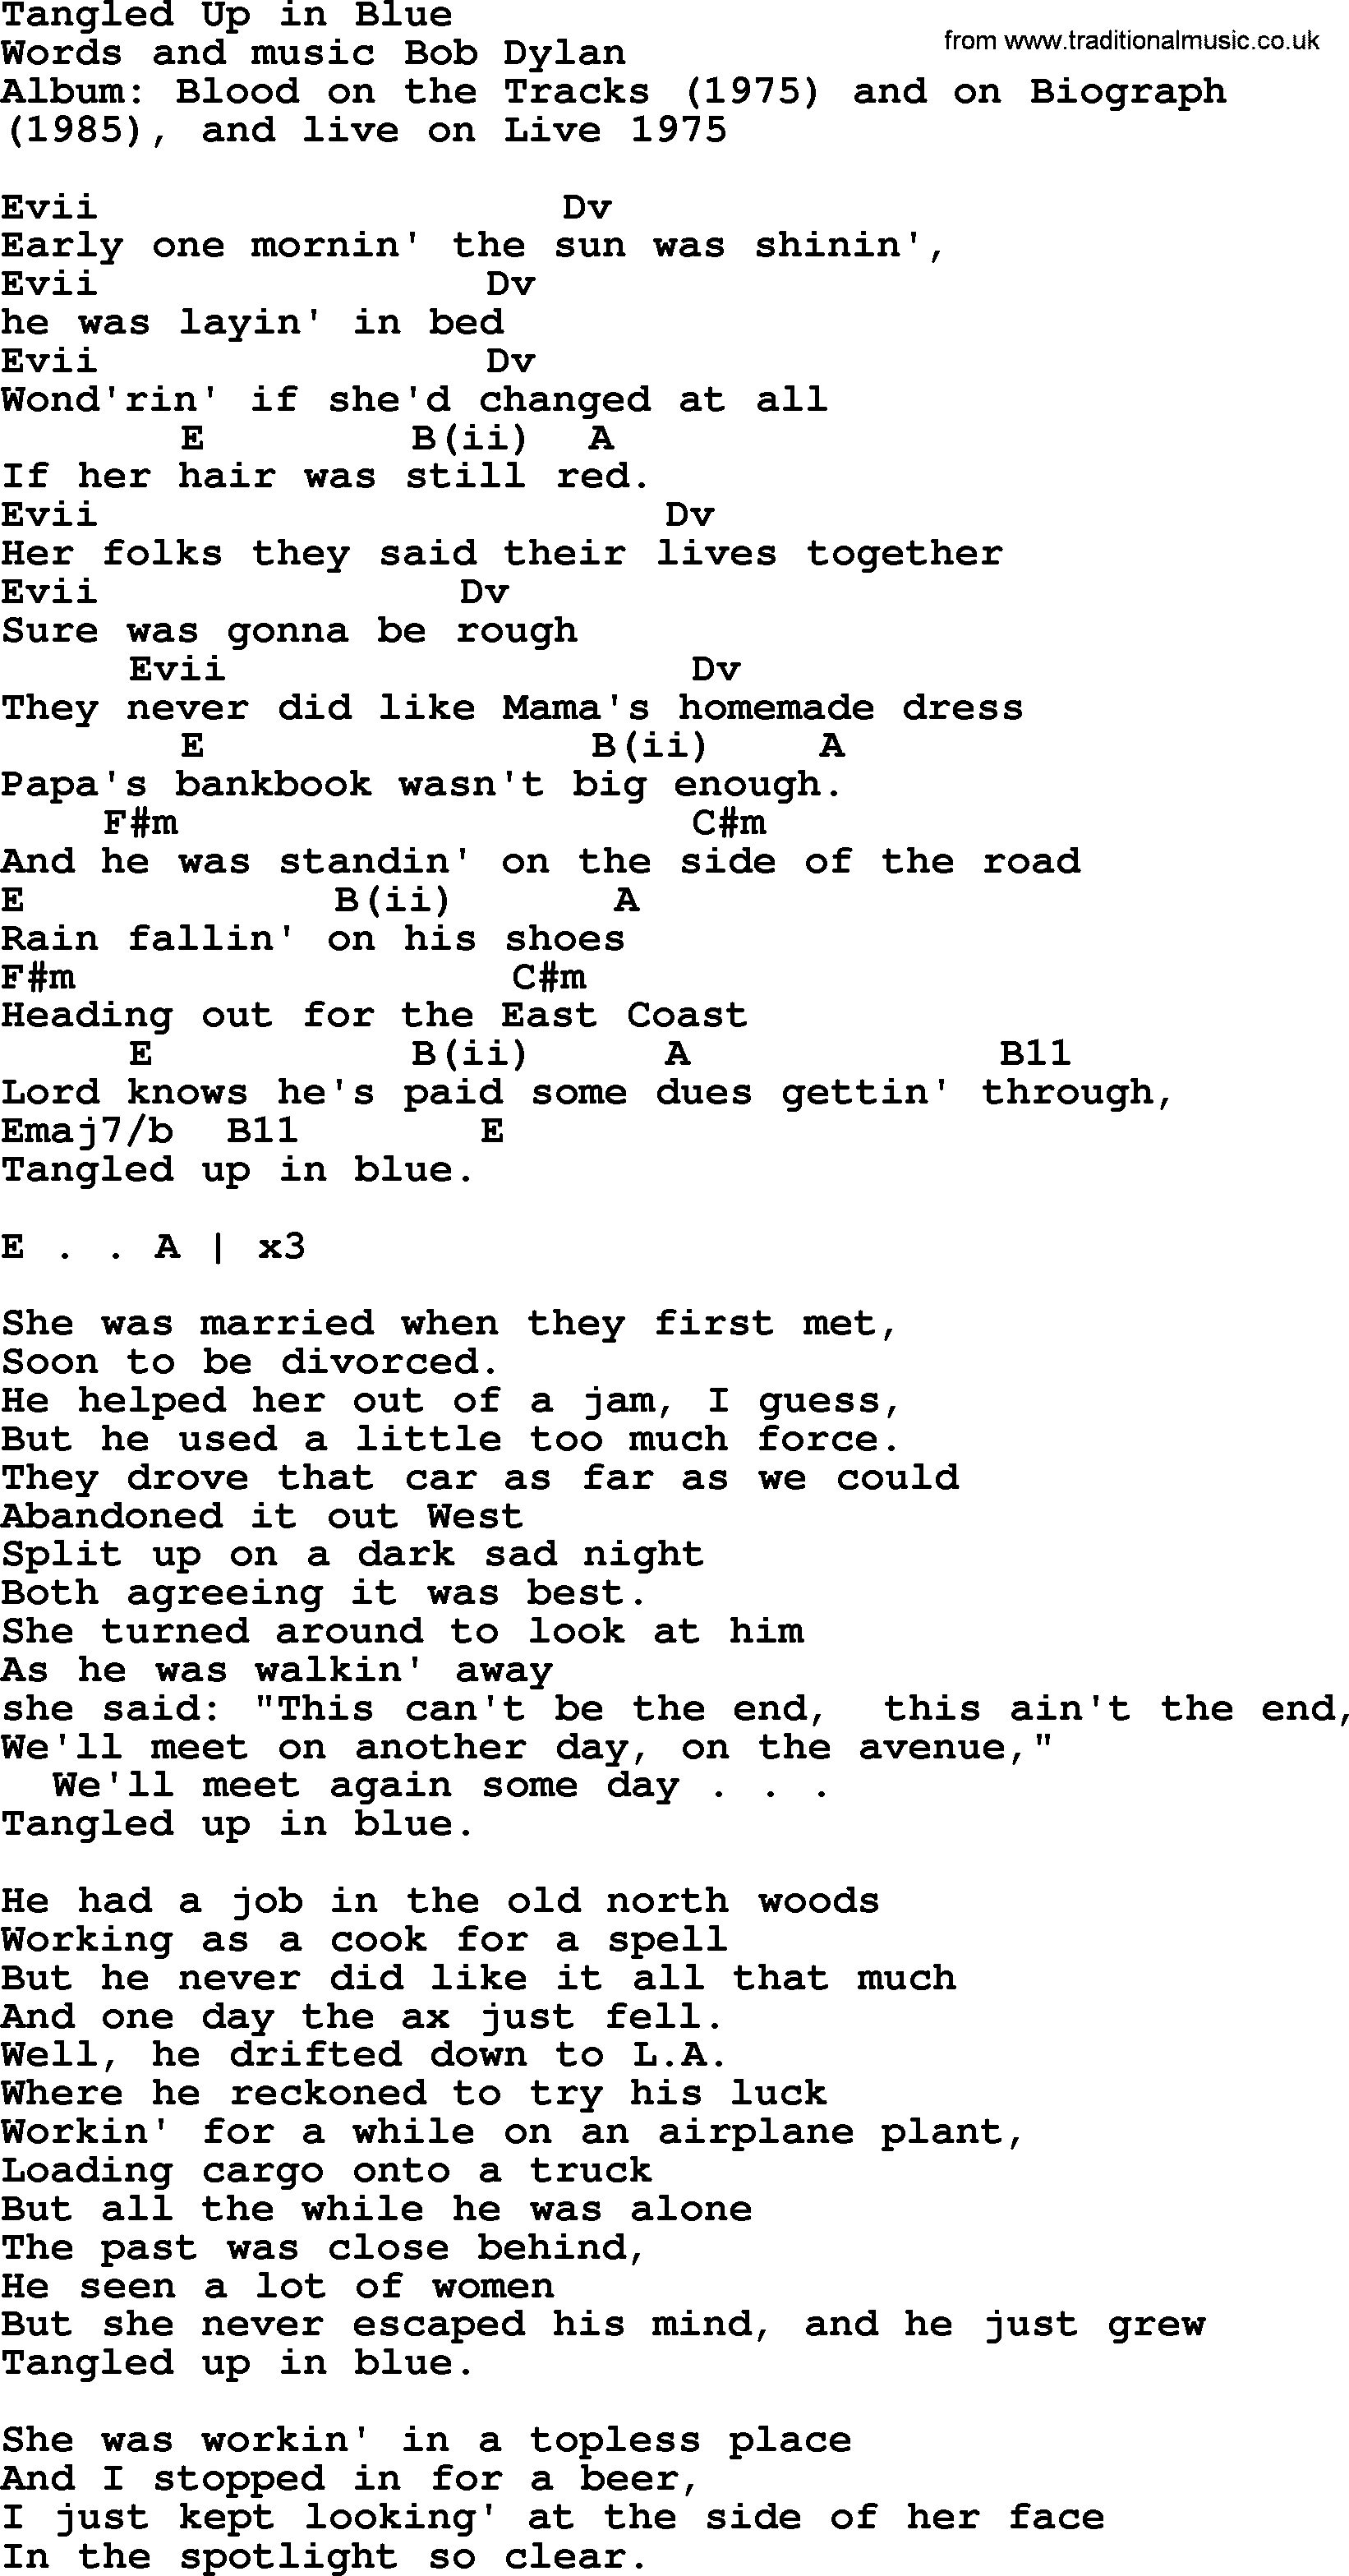 Bob Dylan song, lyrics with chords - Tangled Up in Blue